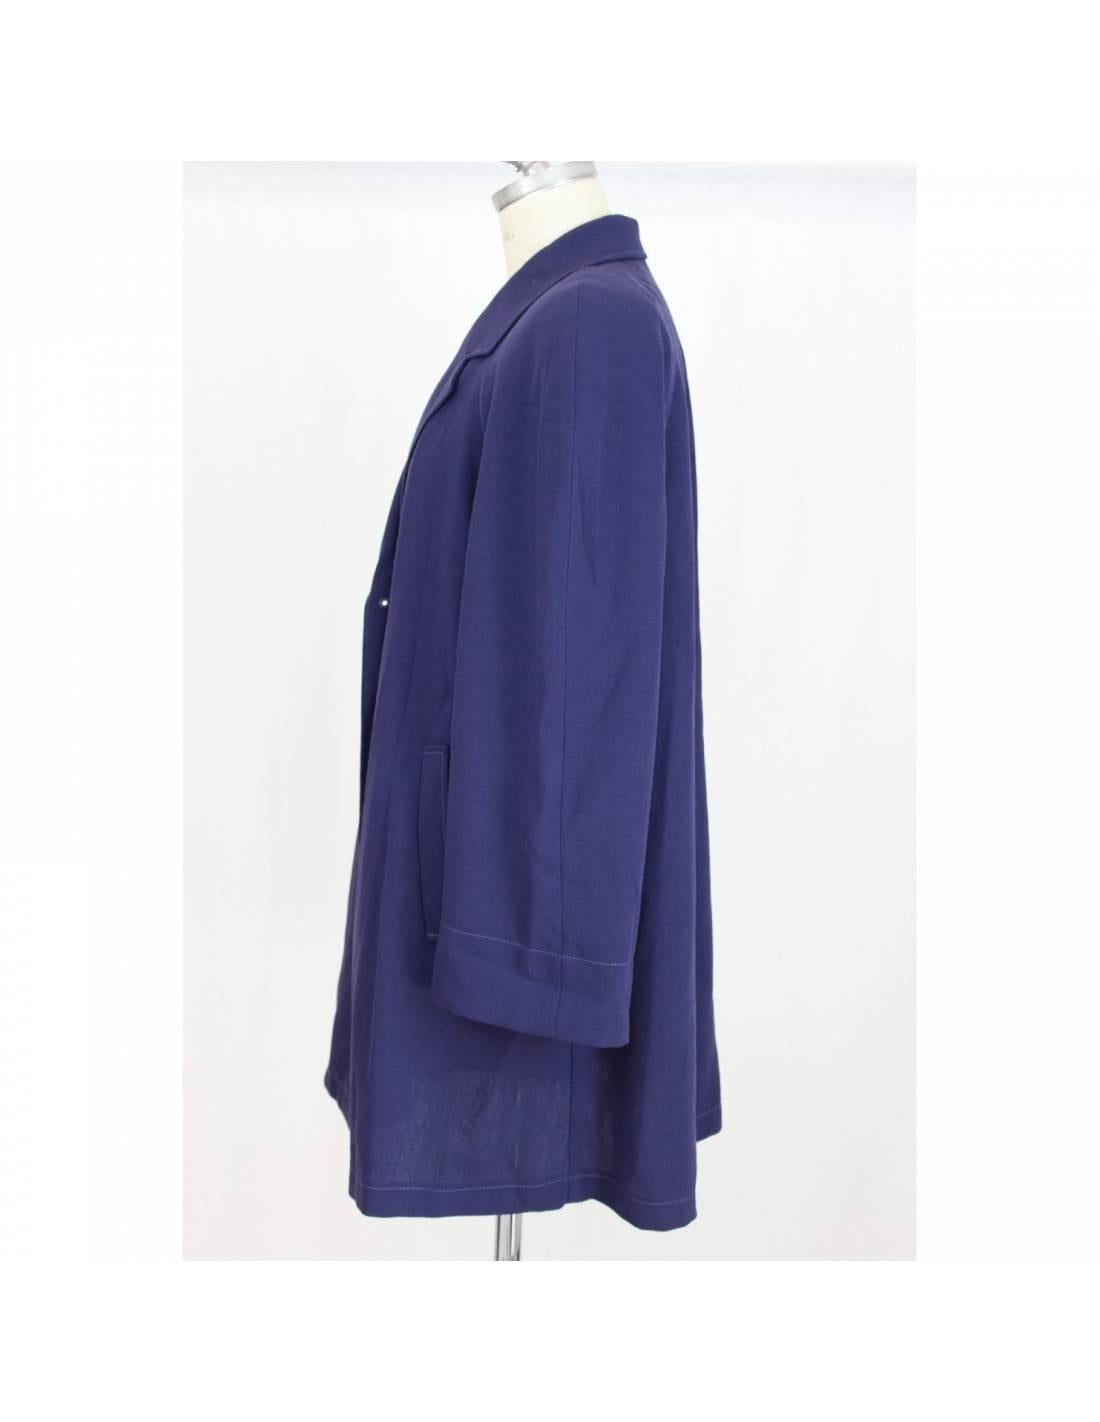 Vintage cotton coat by Italian designer Laura Biagiotti, purple with three gold-colored buttons on the bust and two pockets on the sides. Made in Italy of 1980s in excellent condition.

SIZE 46 IT 12 US 14 UK

Shoulder: 48 cm
Bust / chest: 57